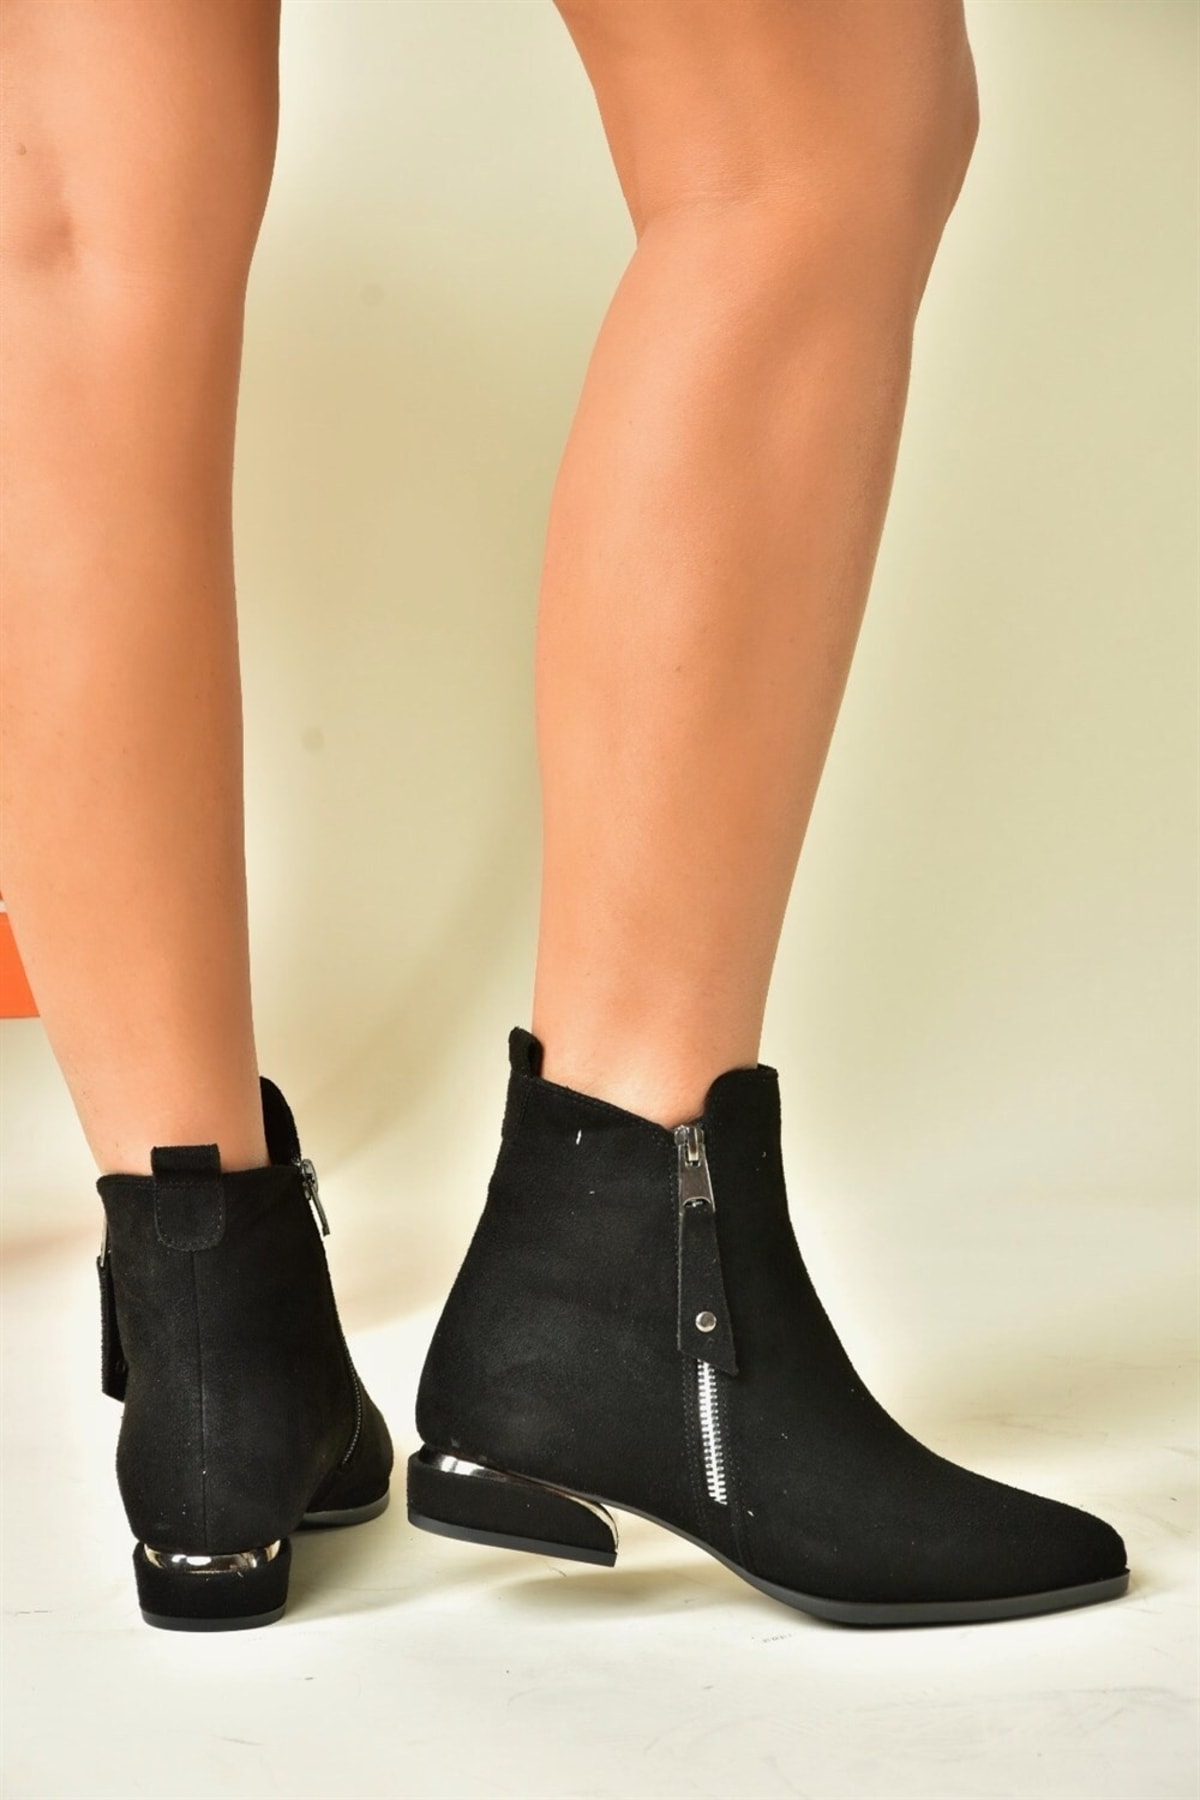 Fox Shoes Women's Black Suede Low Heeled Boots